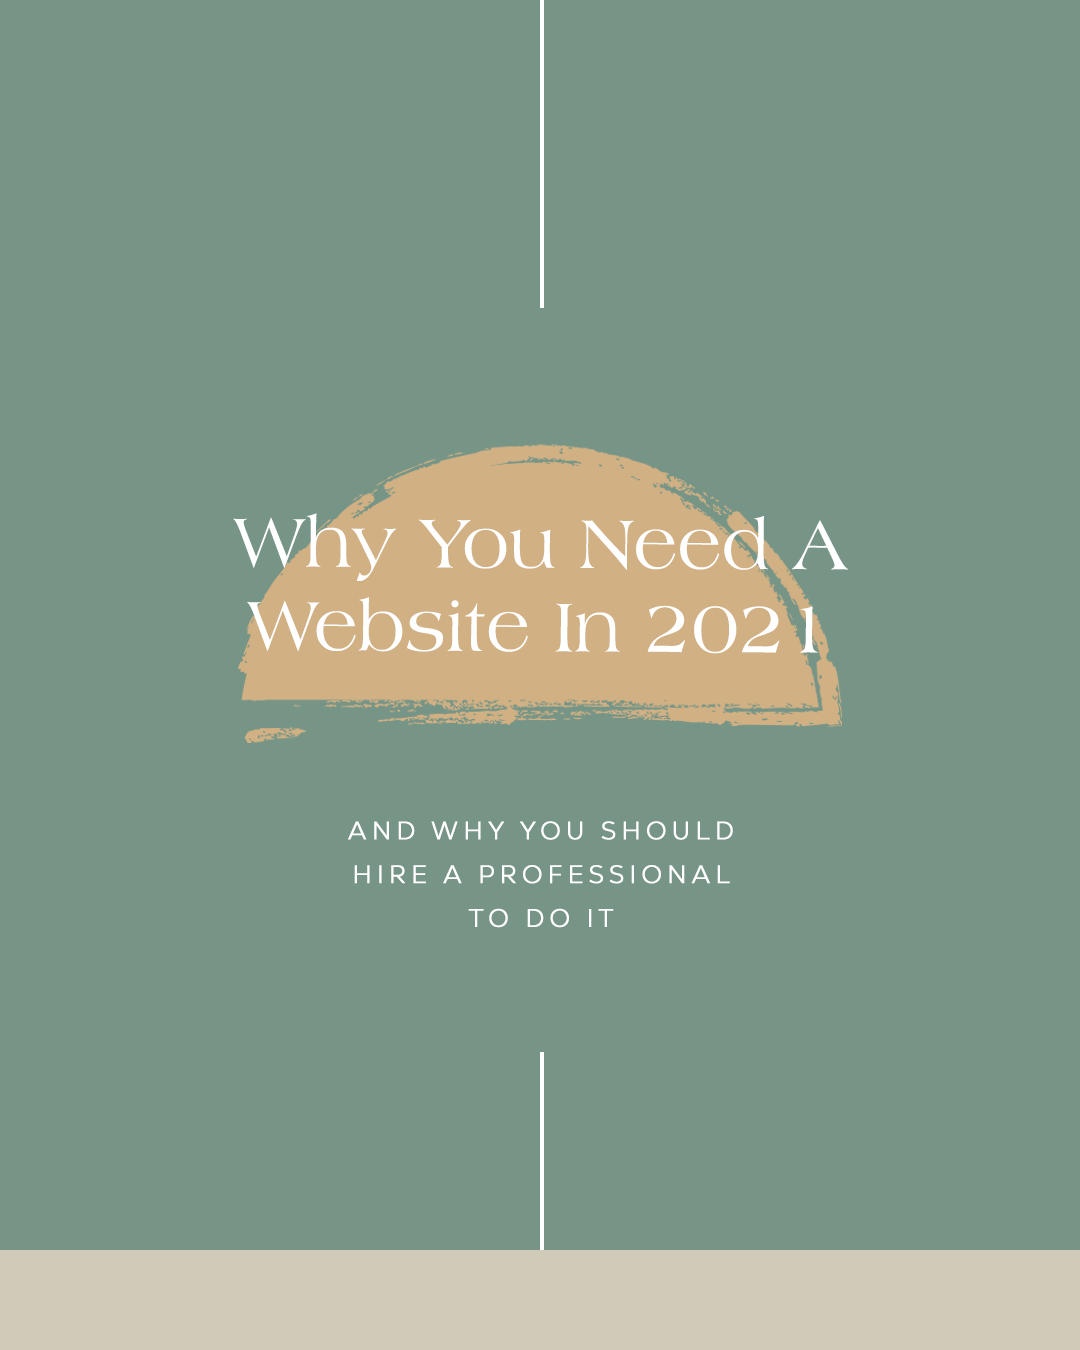 Why You Need A Website In 2021